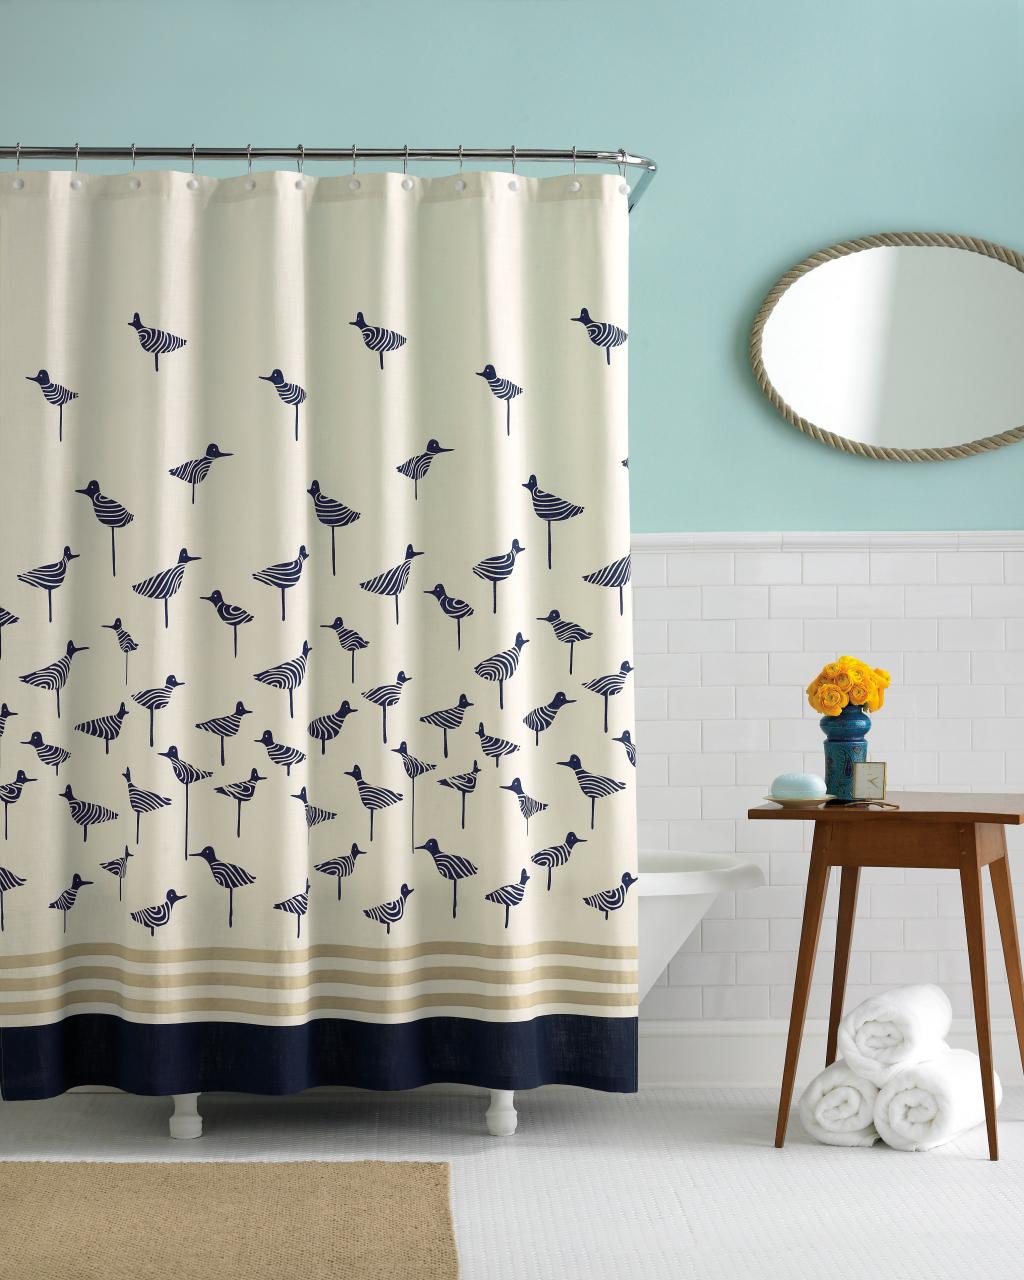 Bed Bath and Beyond Shower Curtains Offer Great Look and Functional